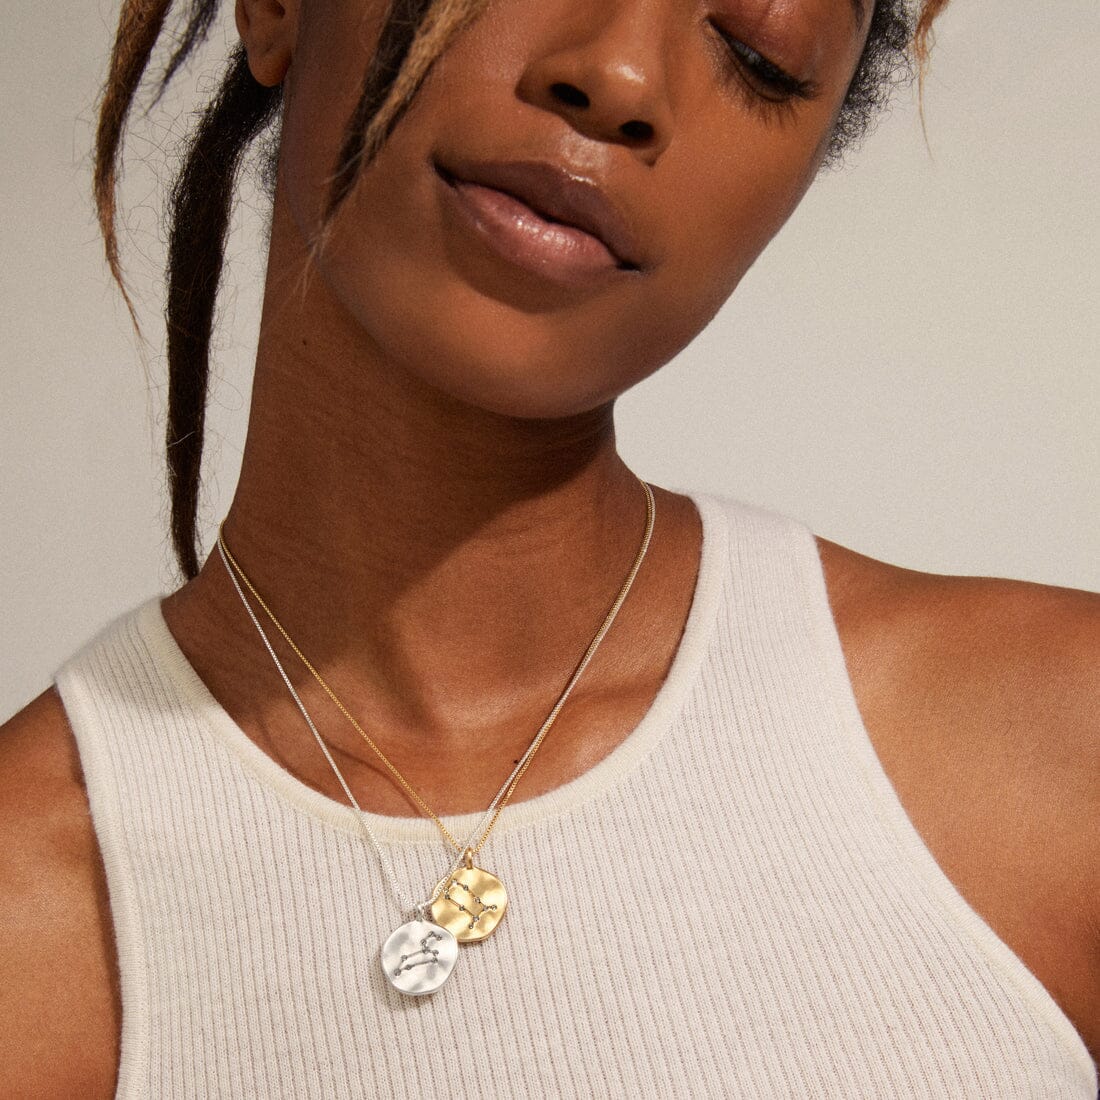 AQUARIUS. The eleventh sign of the zodiac. This coin necklace takes you on a journey all the way up to the stars with its stunning double-sided pendant that has a velvety, satin finish.